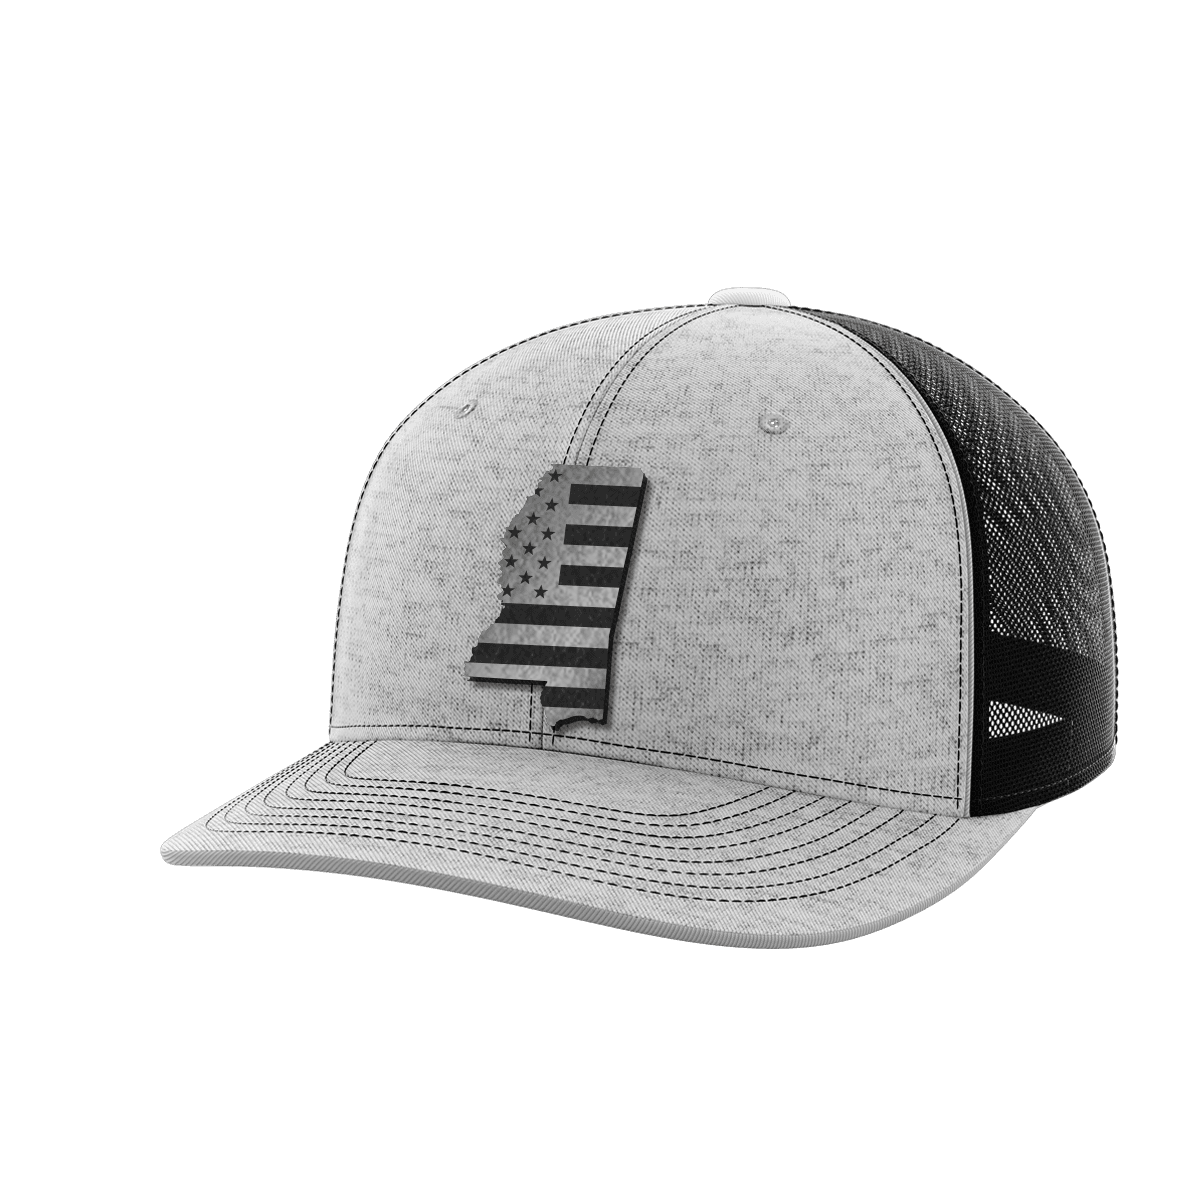 Mississippi United Hats - Greater Half